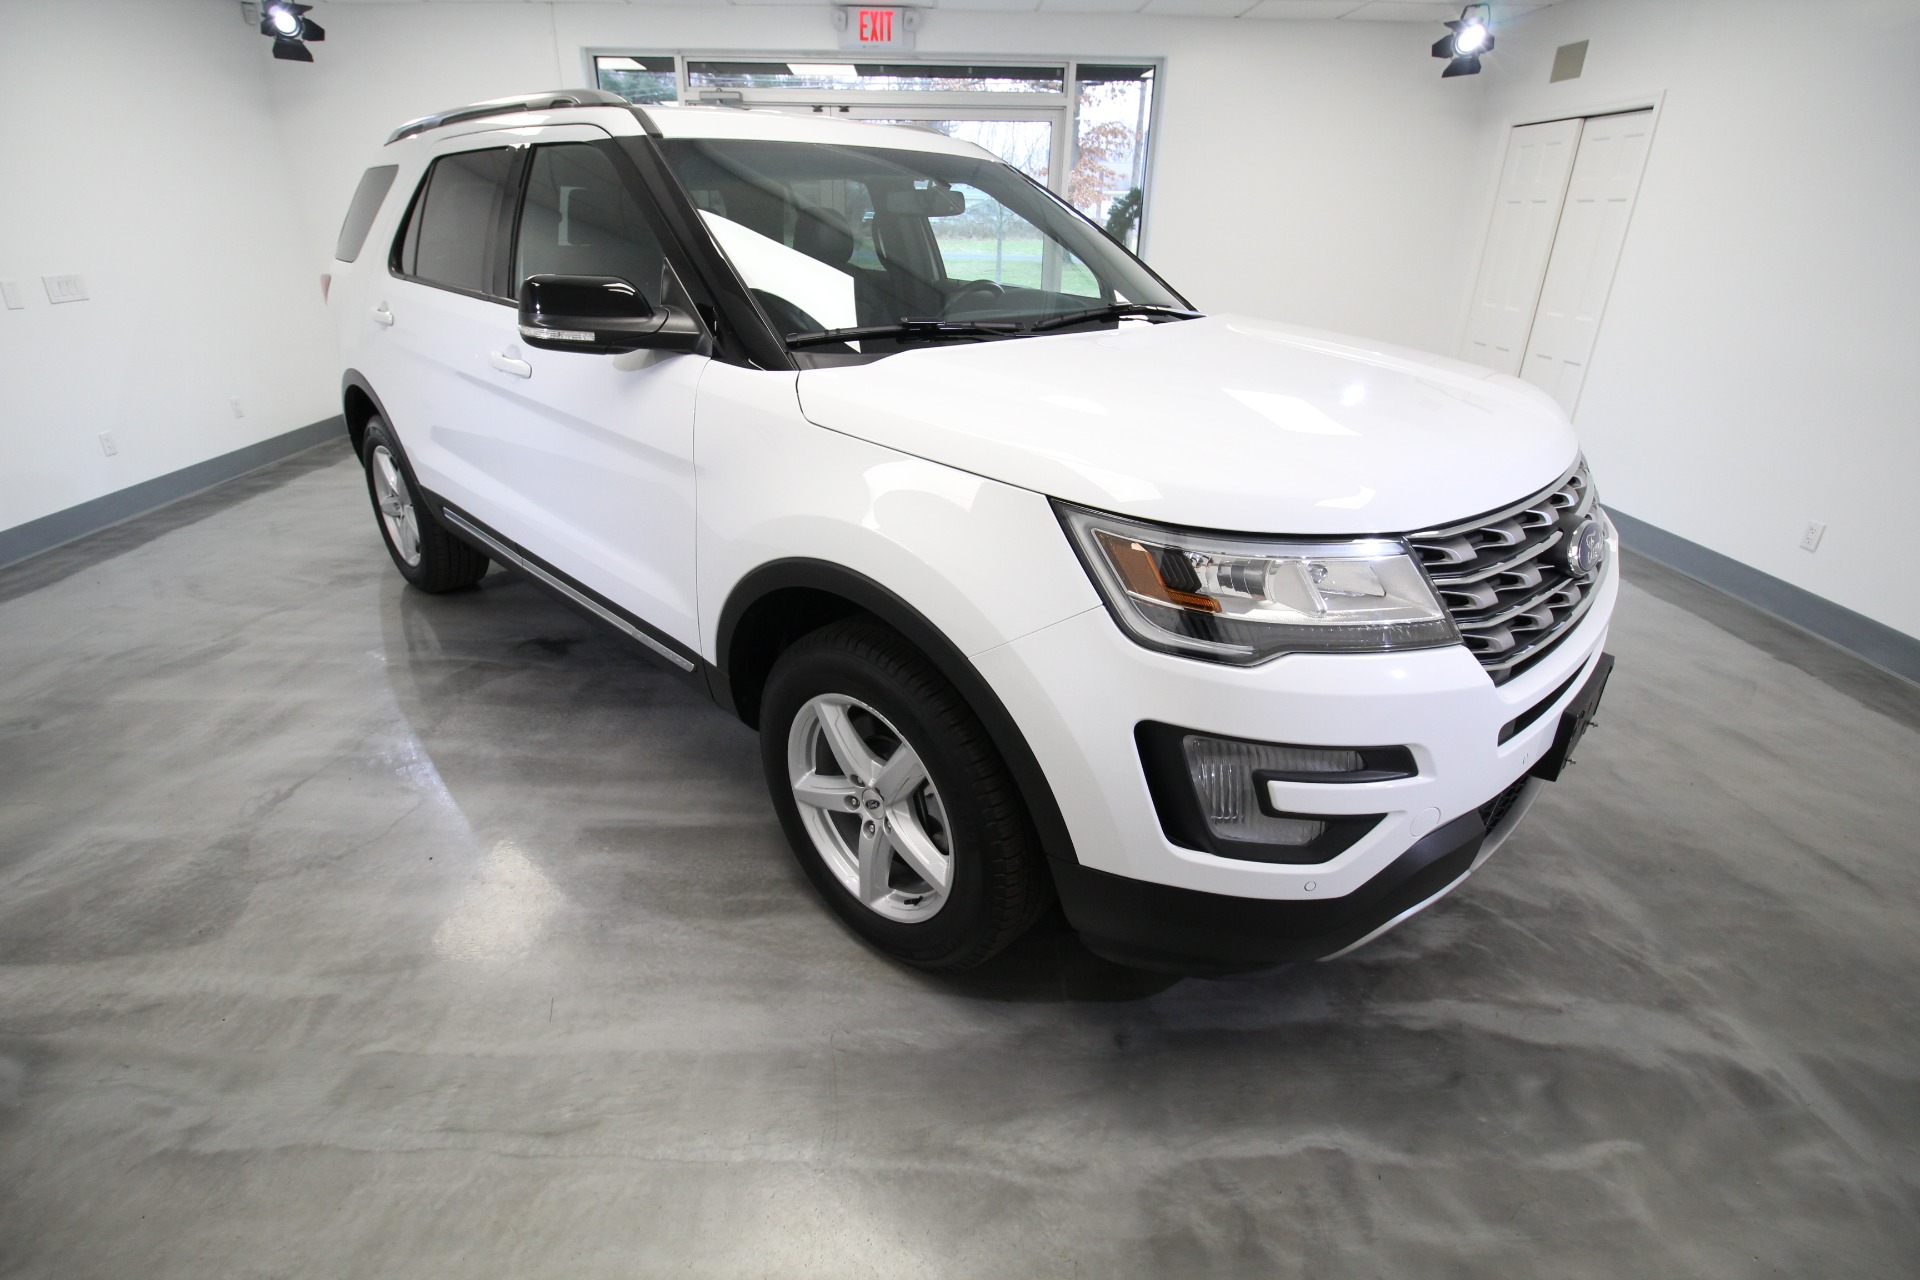 Used 2017 Ford Explorer XLT 4WD LOADED LOCAL CAR LIKE NEW LOW MILES 1 OWNER | Albany, NY